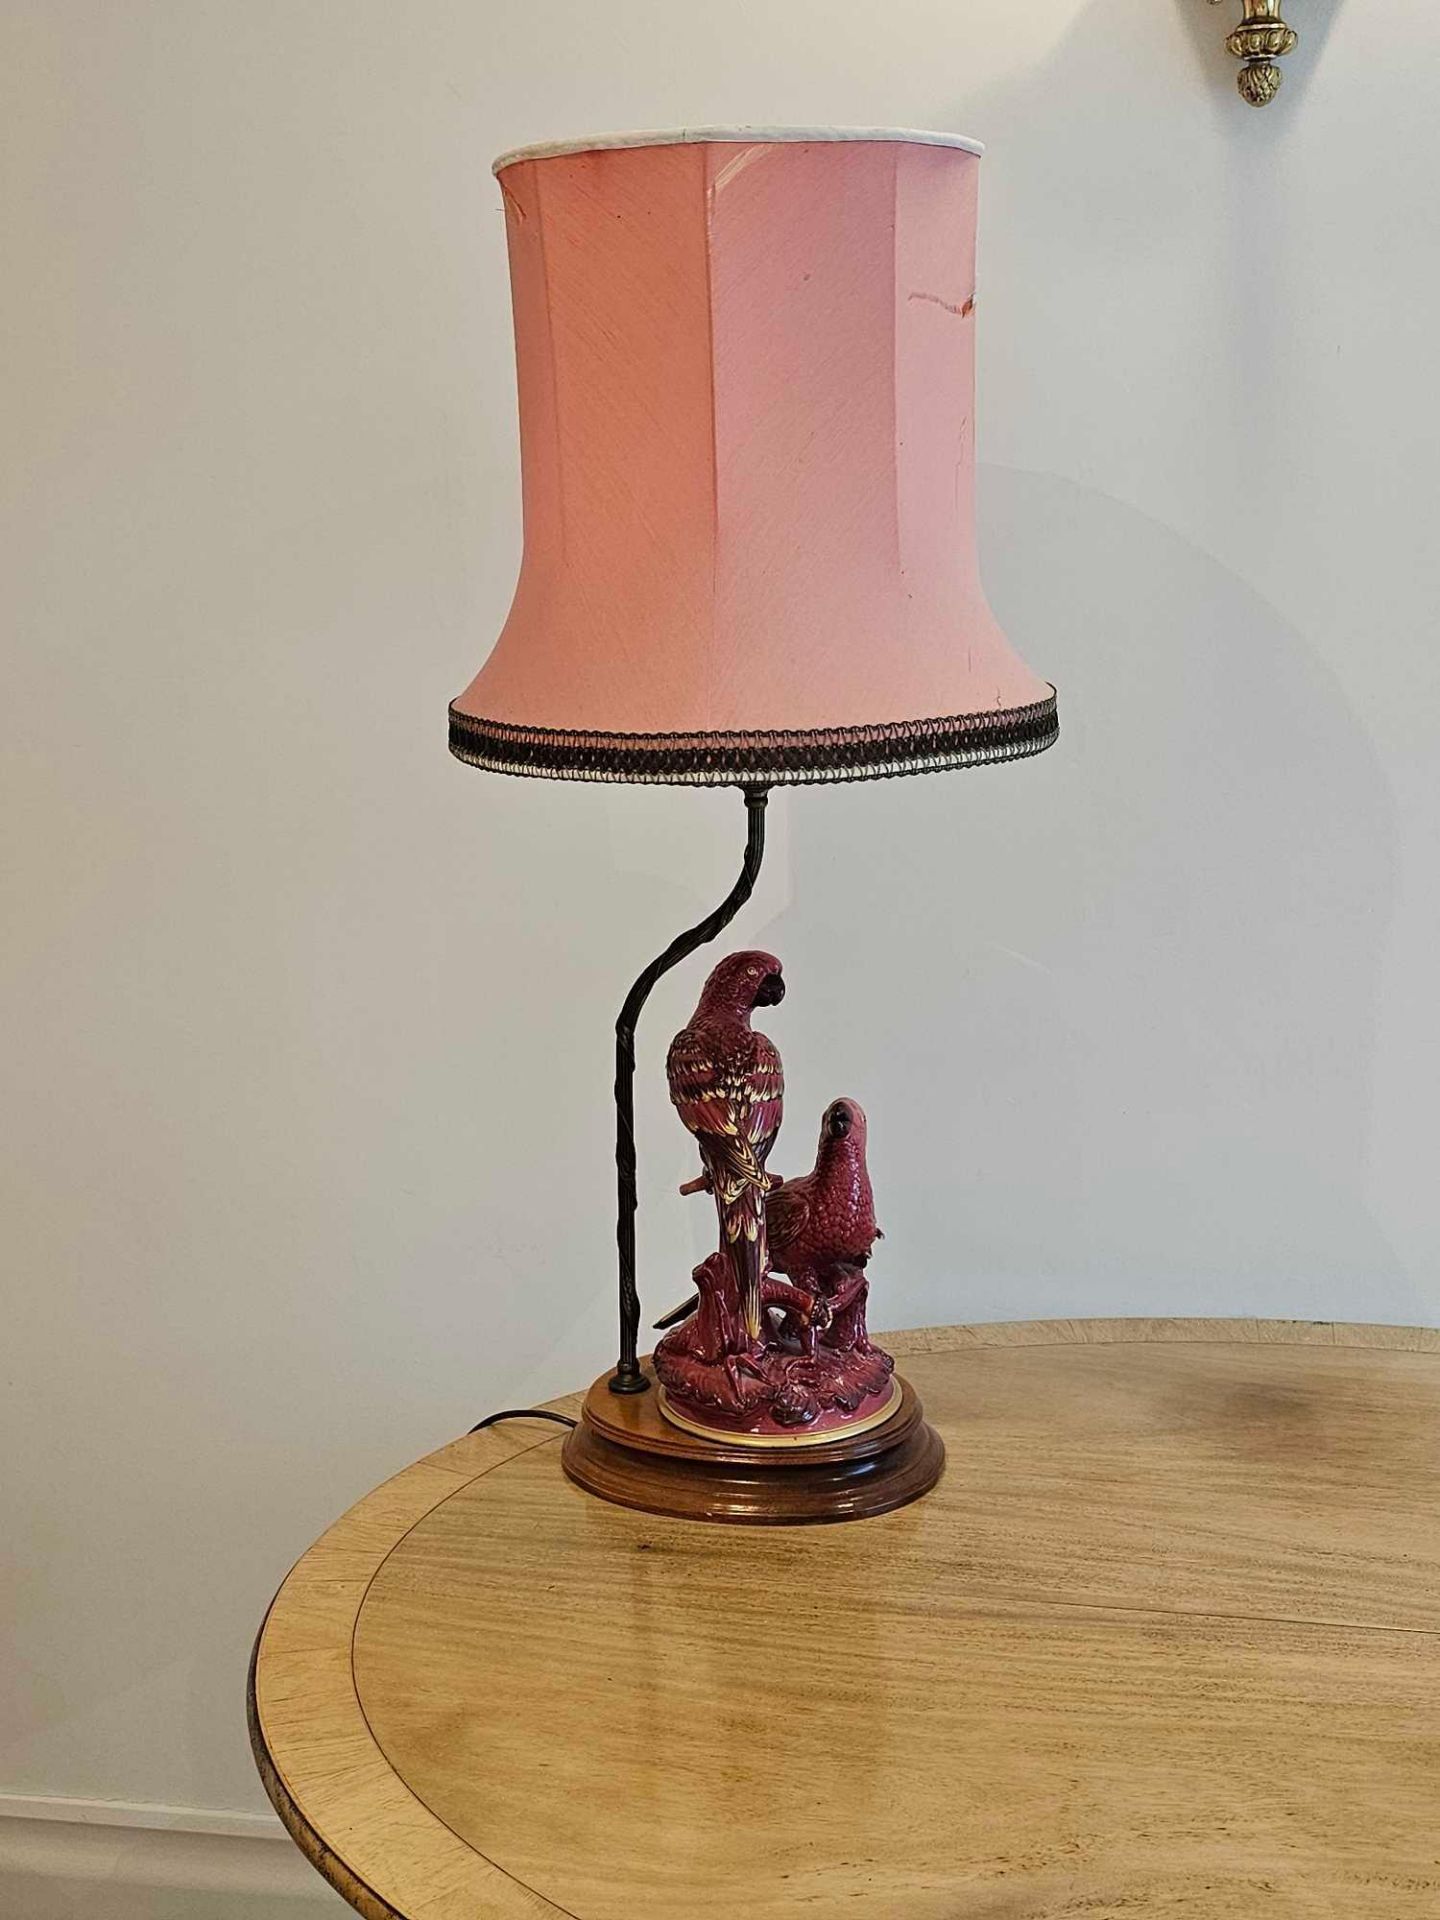 A Vintage Table Lamp Decorated With A Pair Of Painted Ceramic Parrots Sitting Upon A Wooden Base - Image 2 of 3